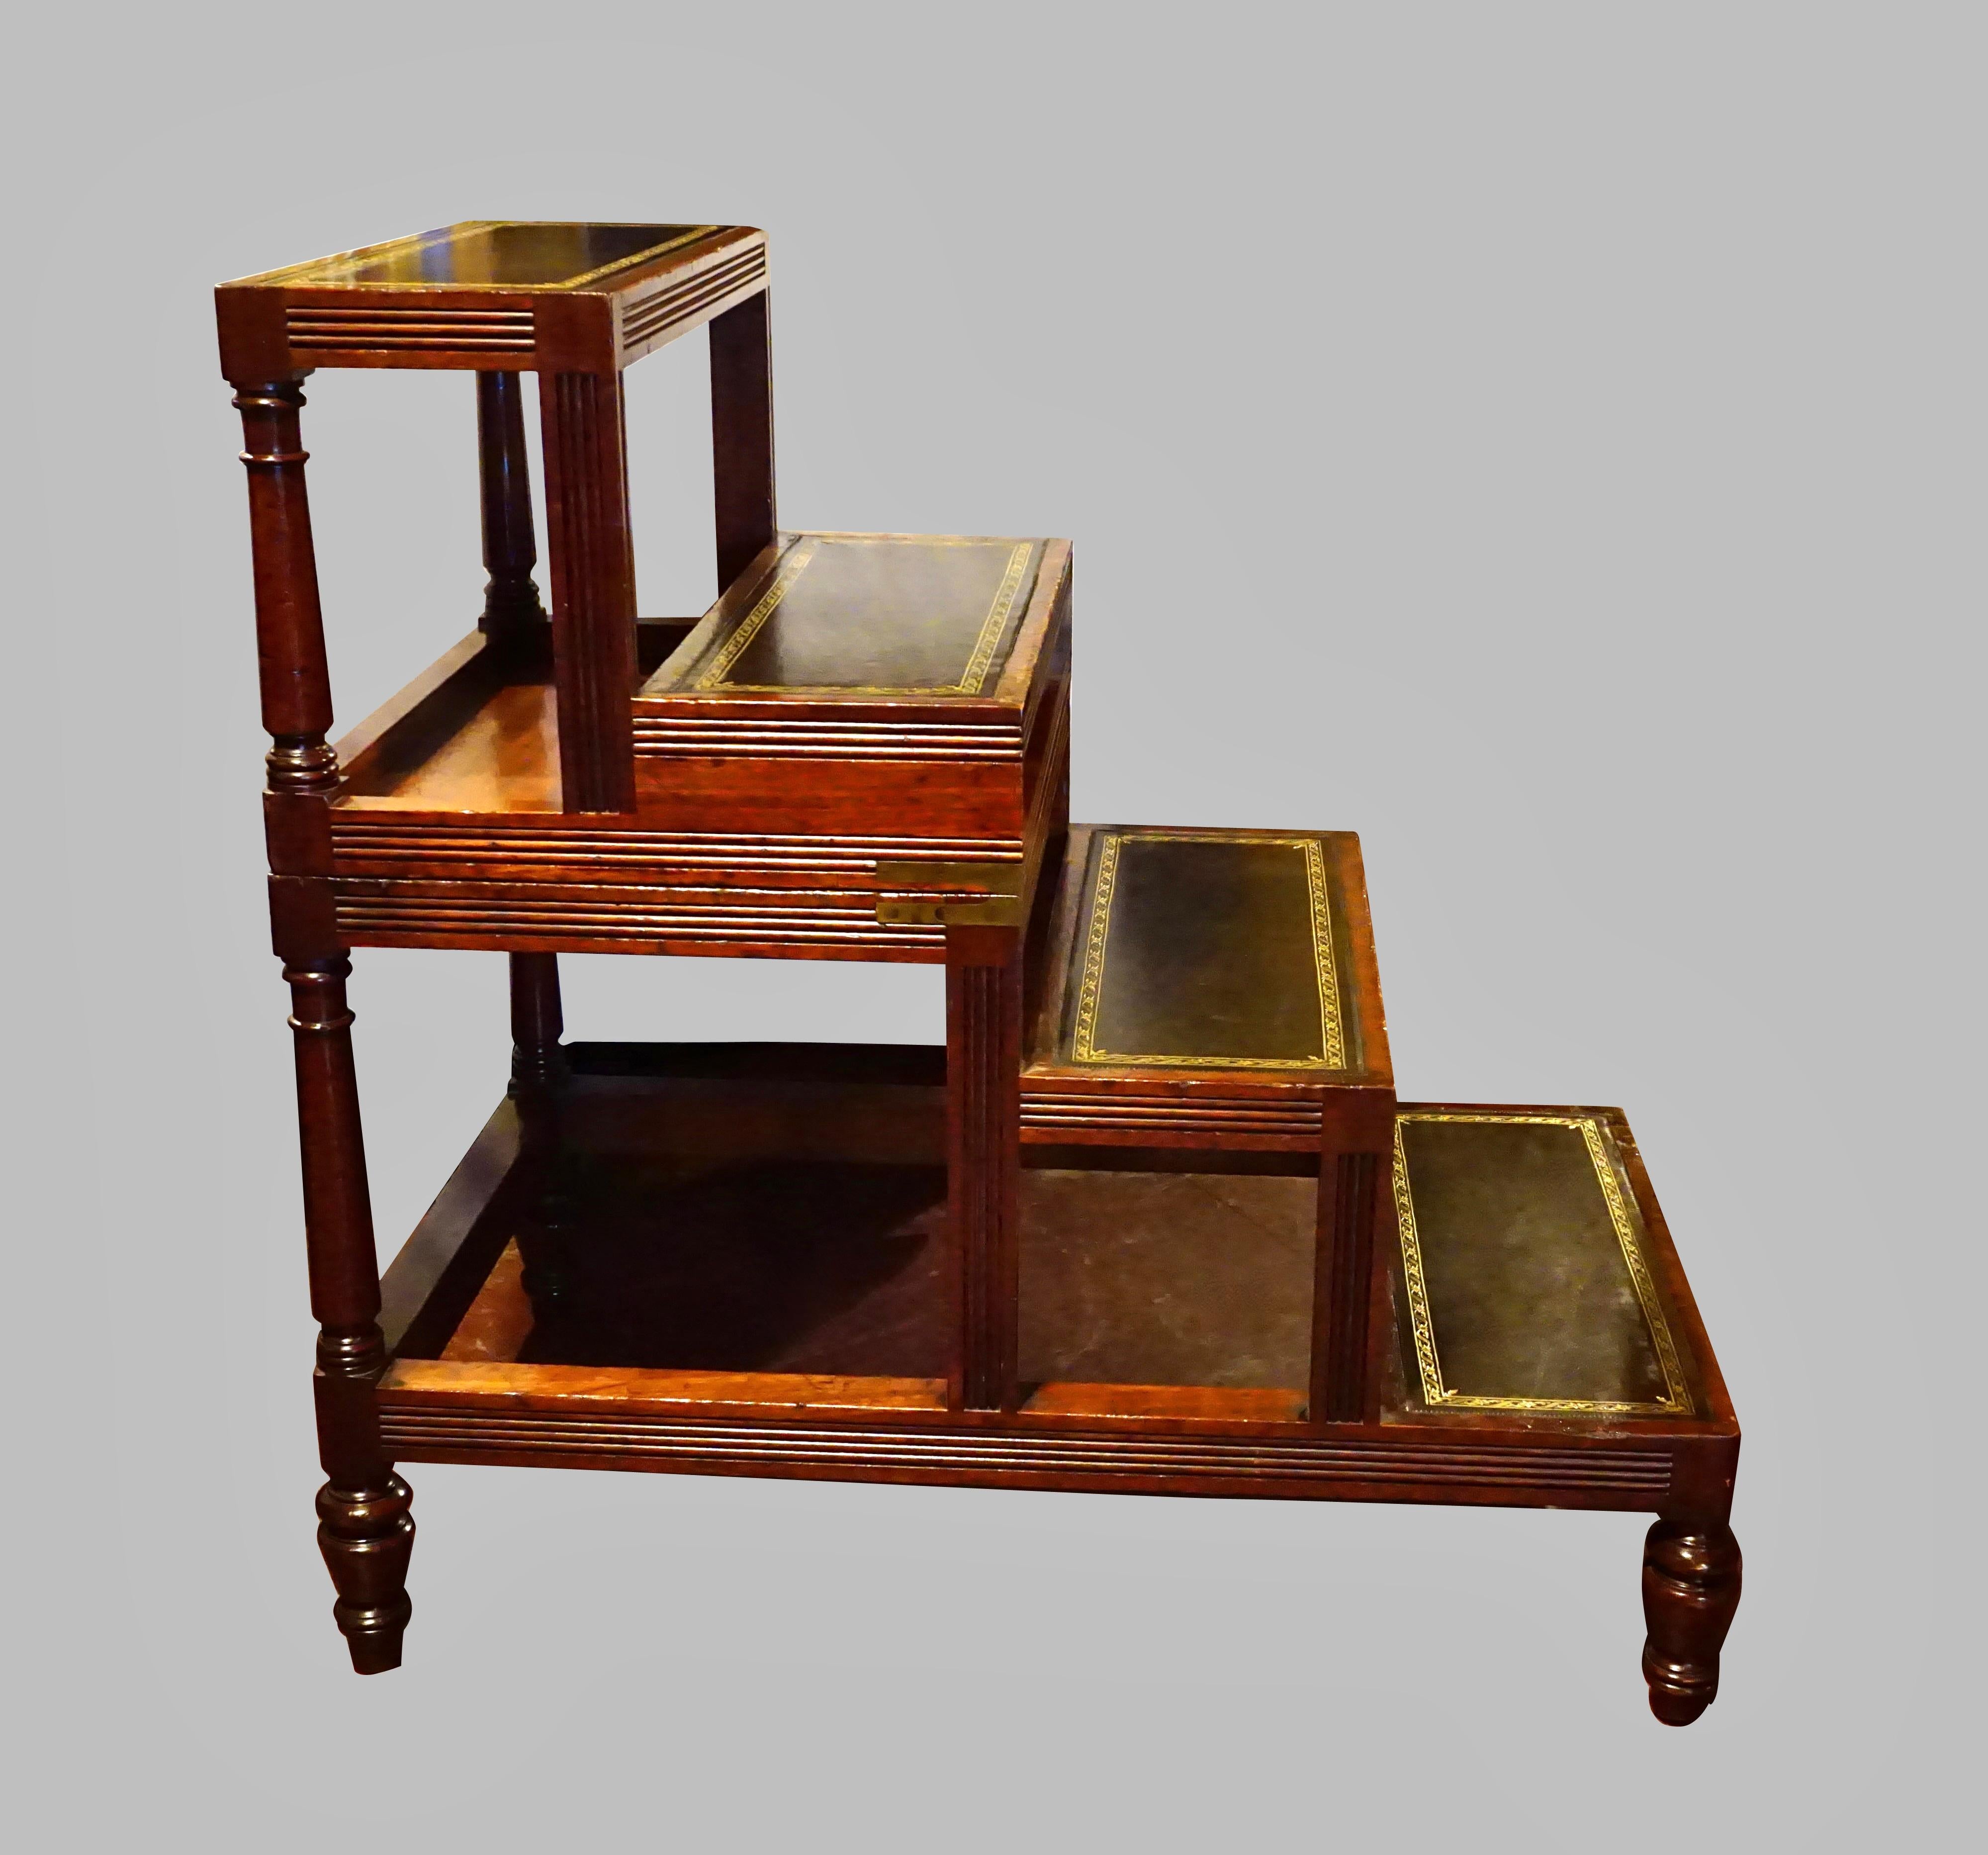 An English mahogany Regency style metamorphic library table with a brown tooled leather top opening to become a set of library stairs with 4 gilt-tooled leather treads supported on turned legs. This type of metamorphic furniture is practical and